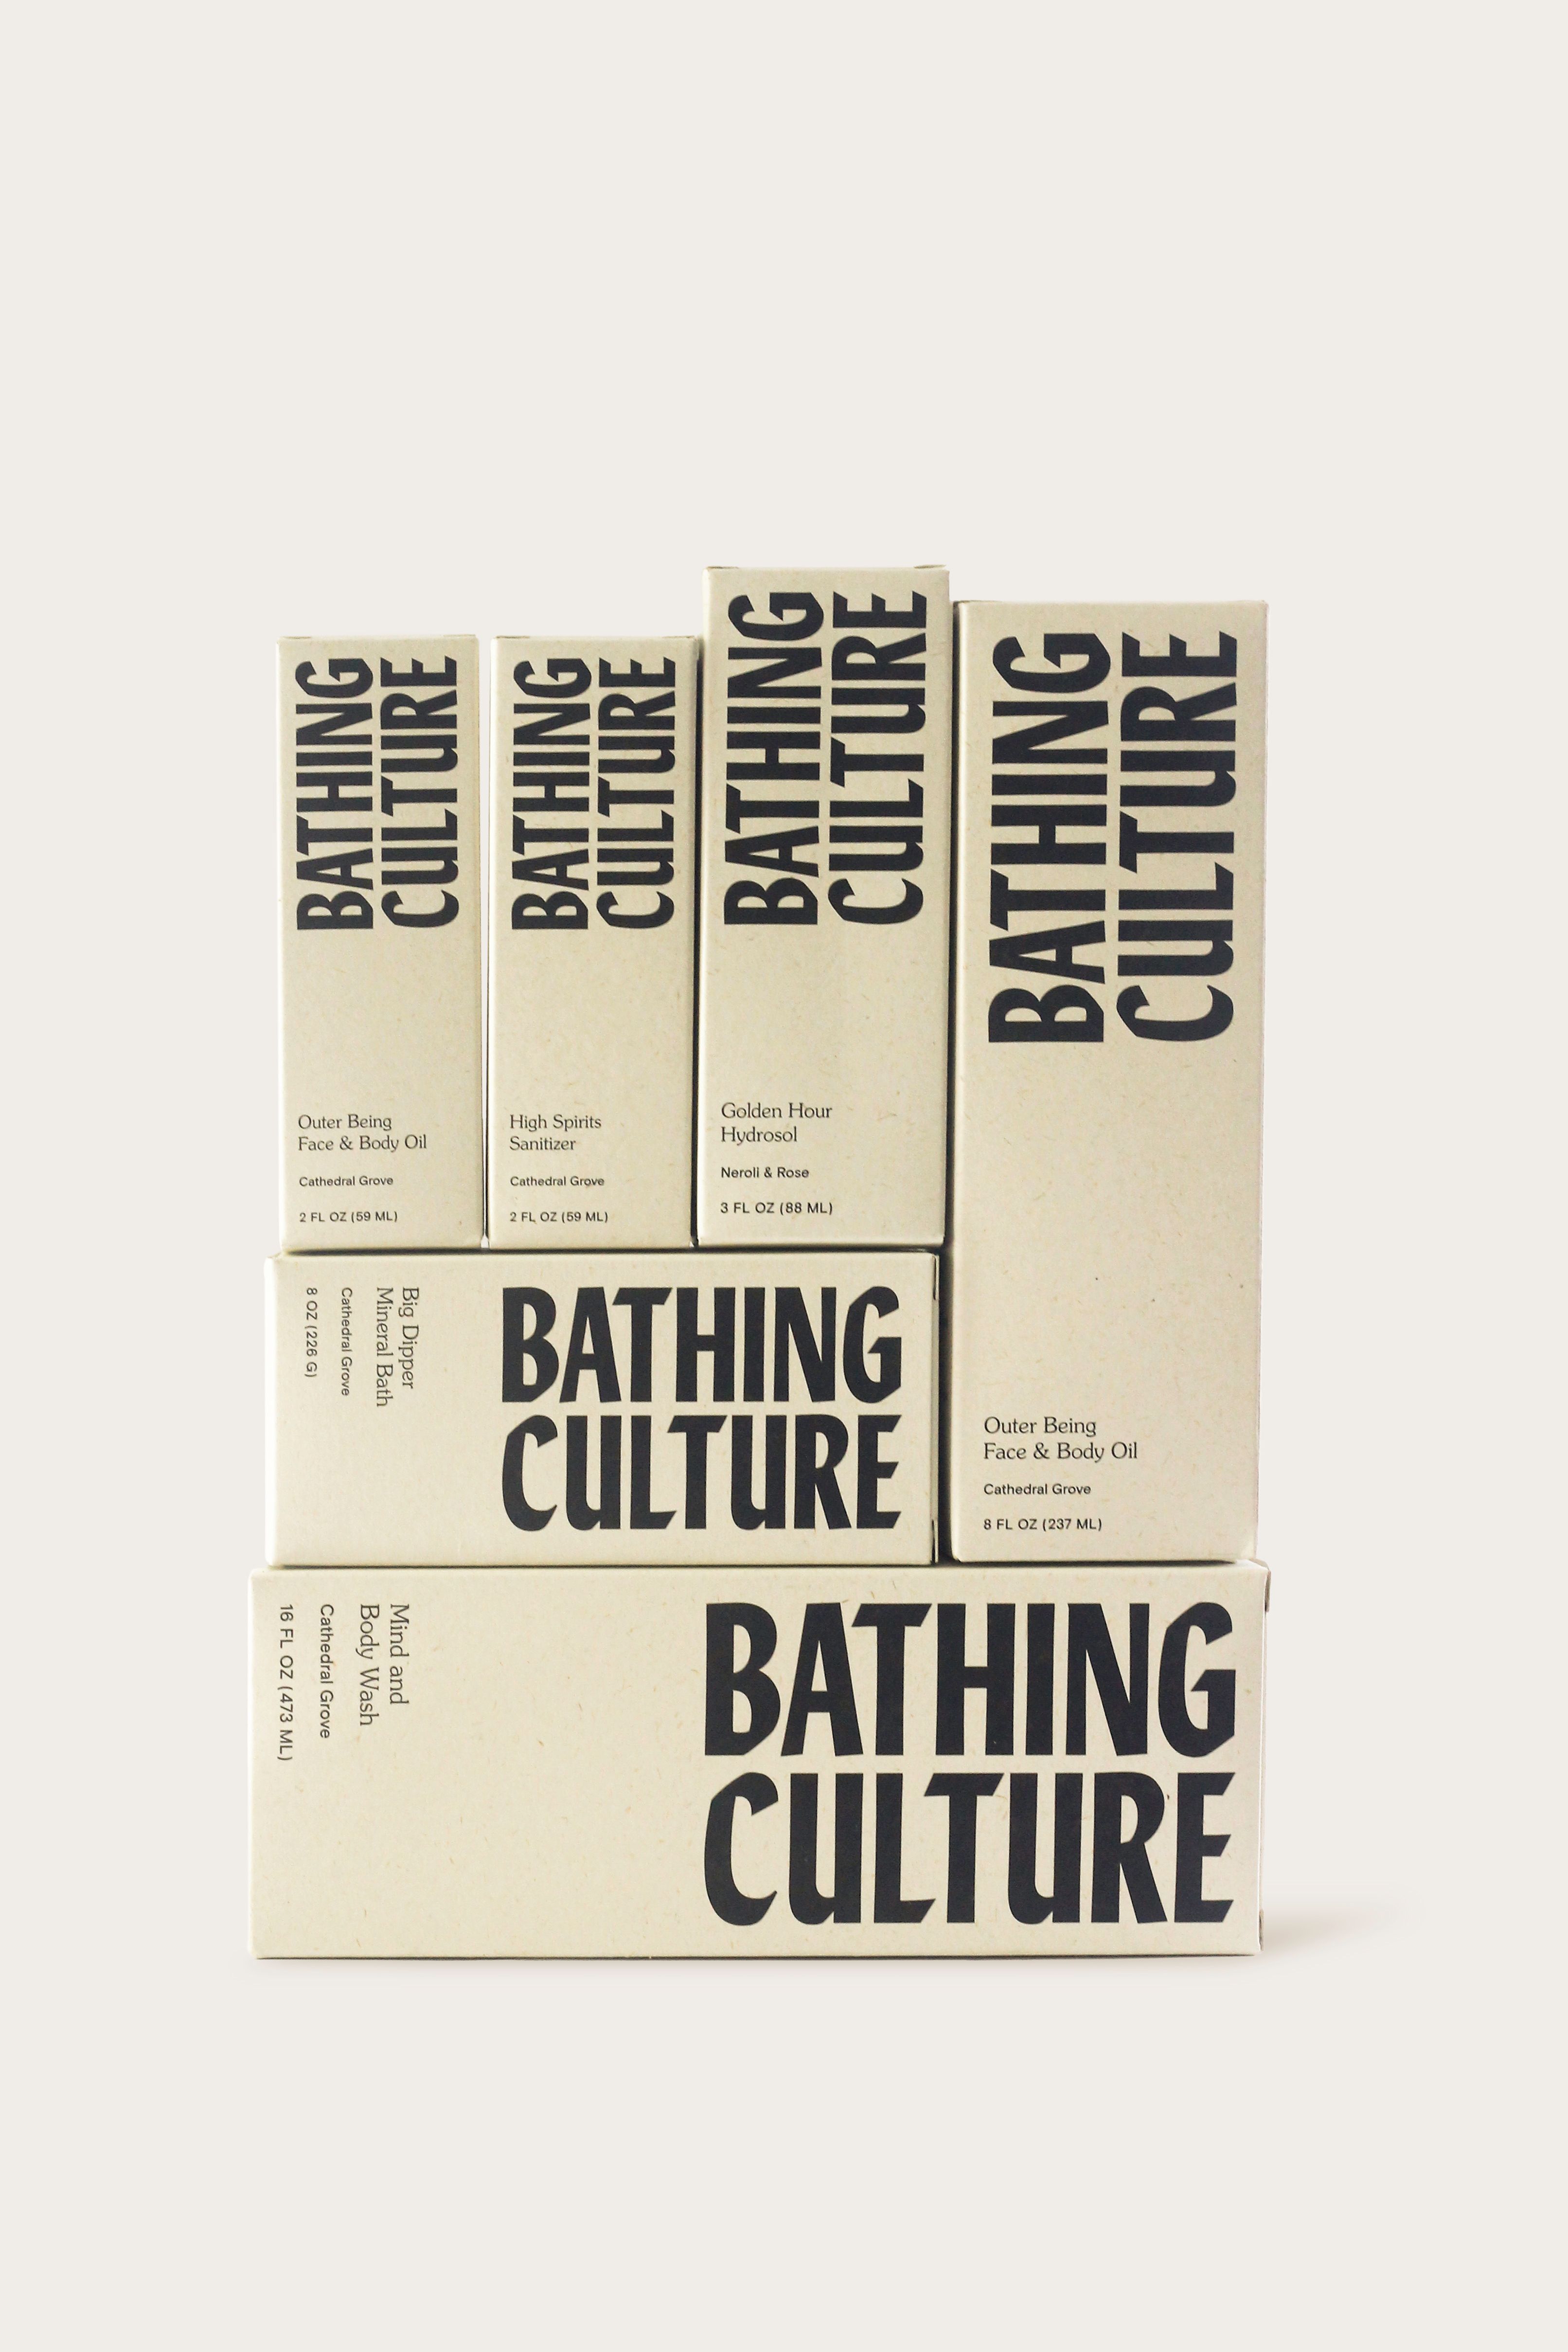 Six Bathing Culture boxes stacked on top of one another